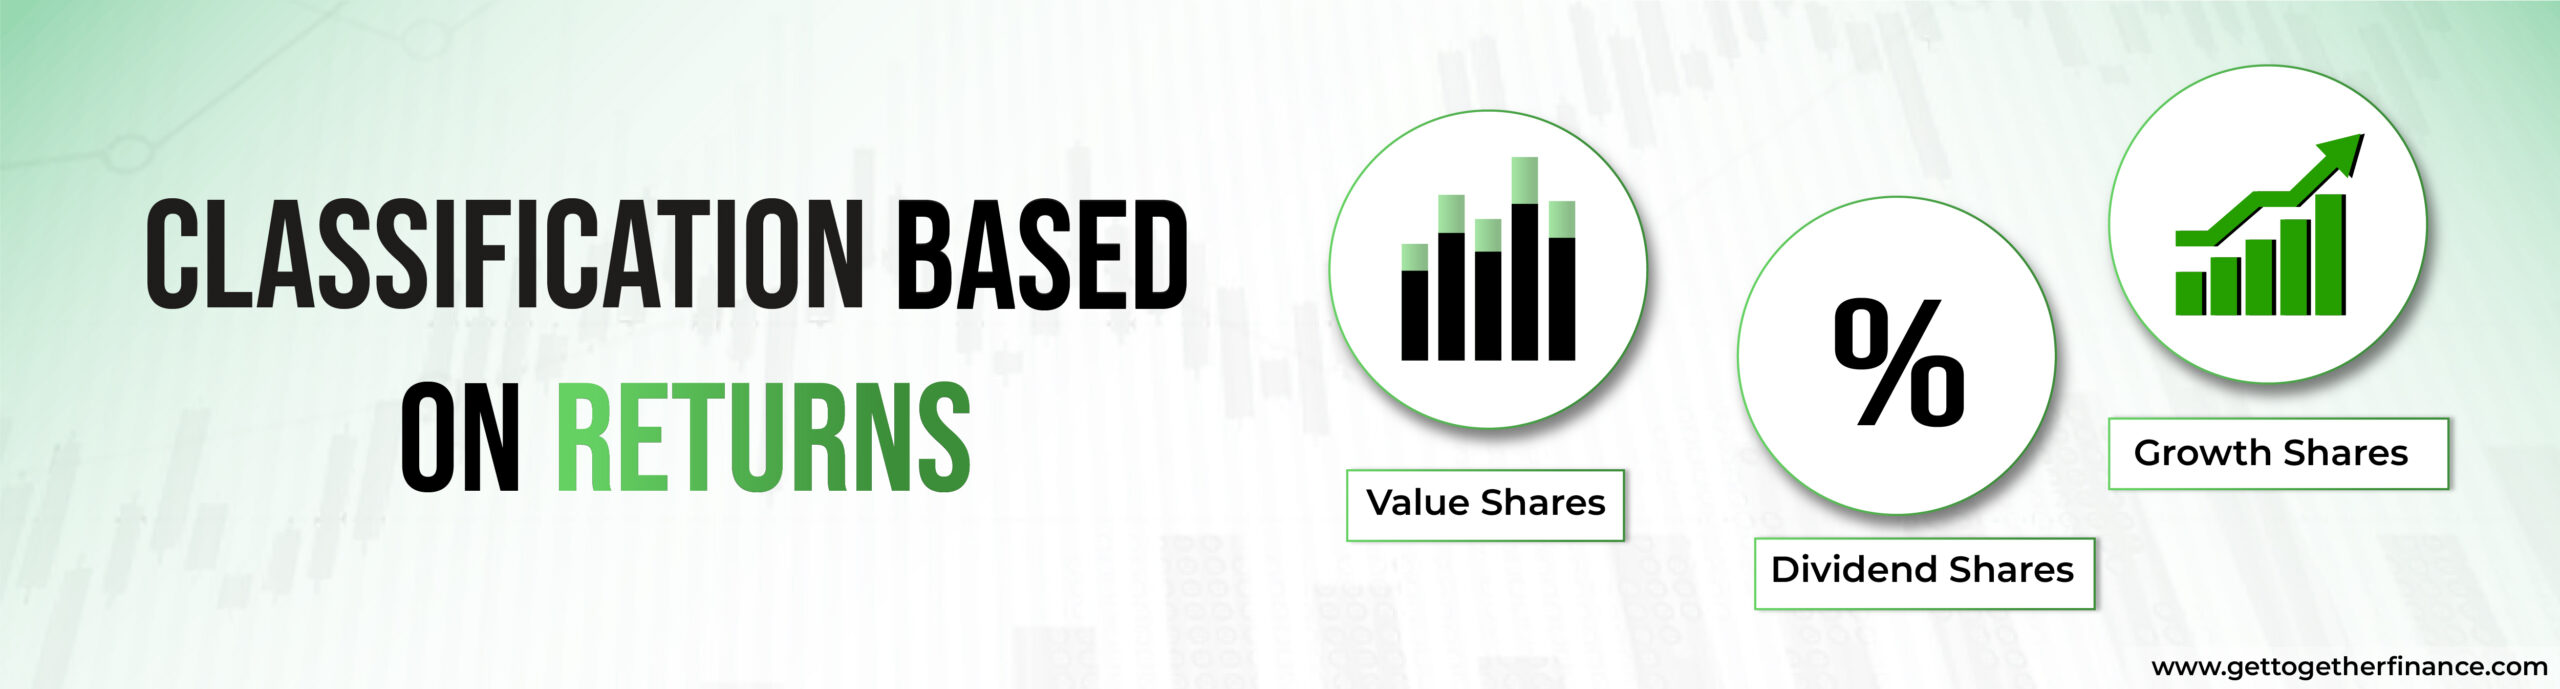 classification of shares based on returns